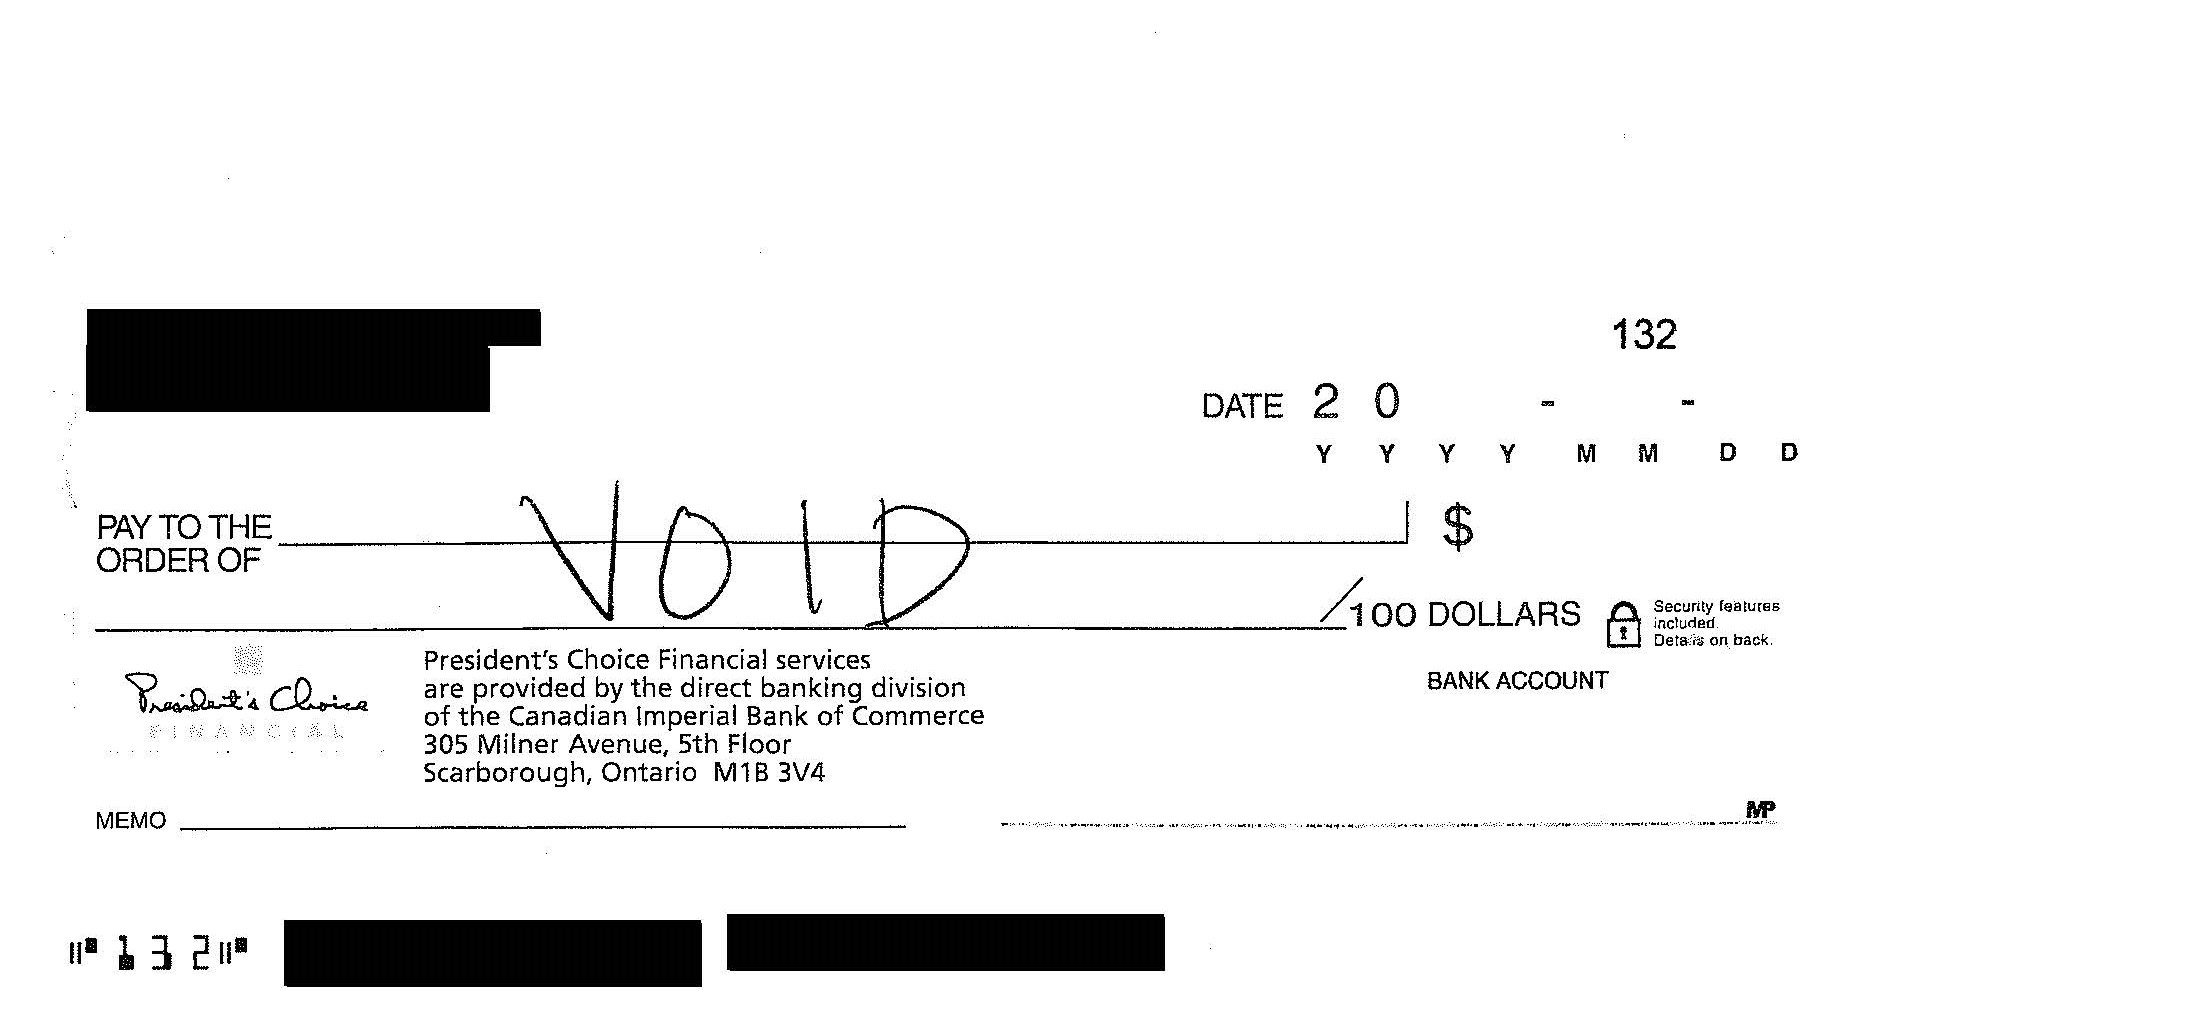 !void cheque_Redacted